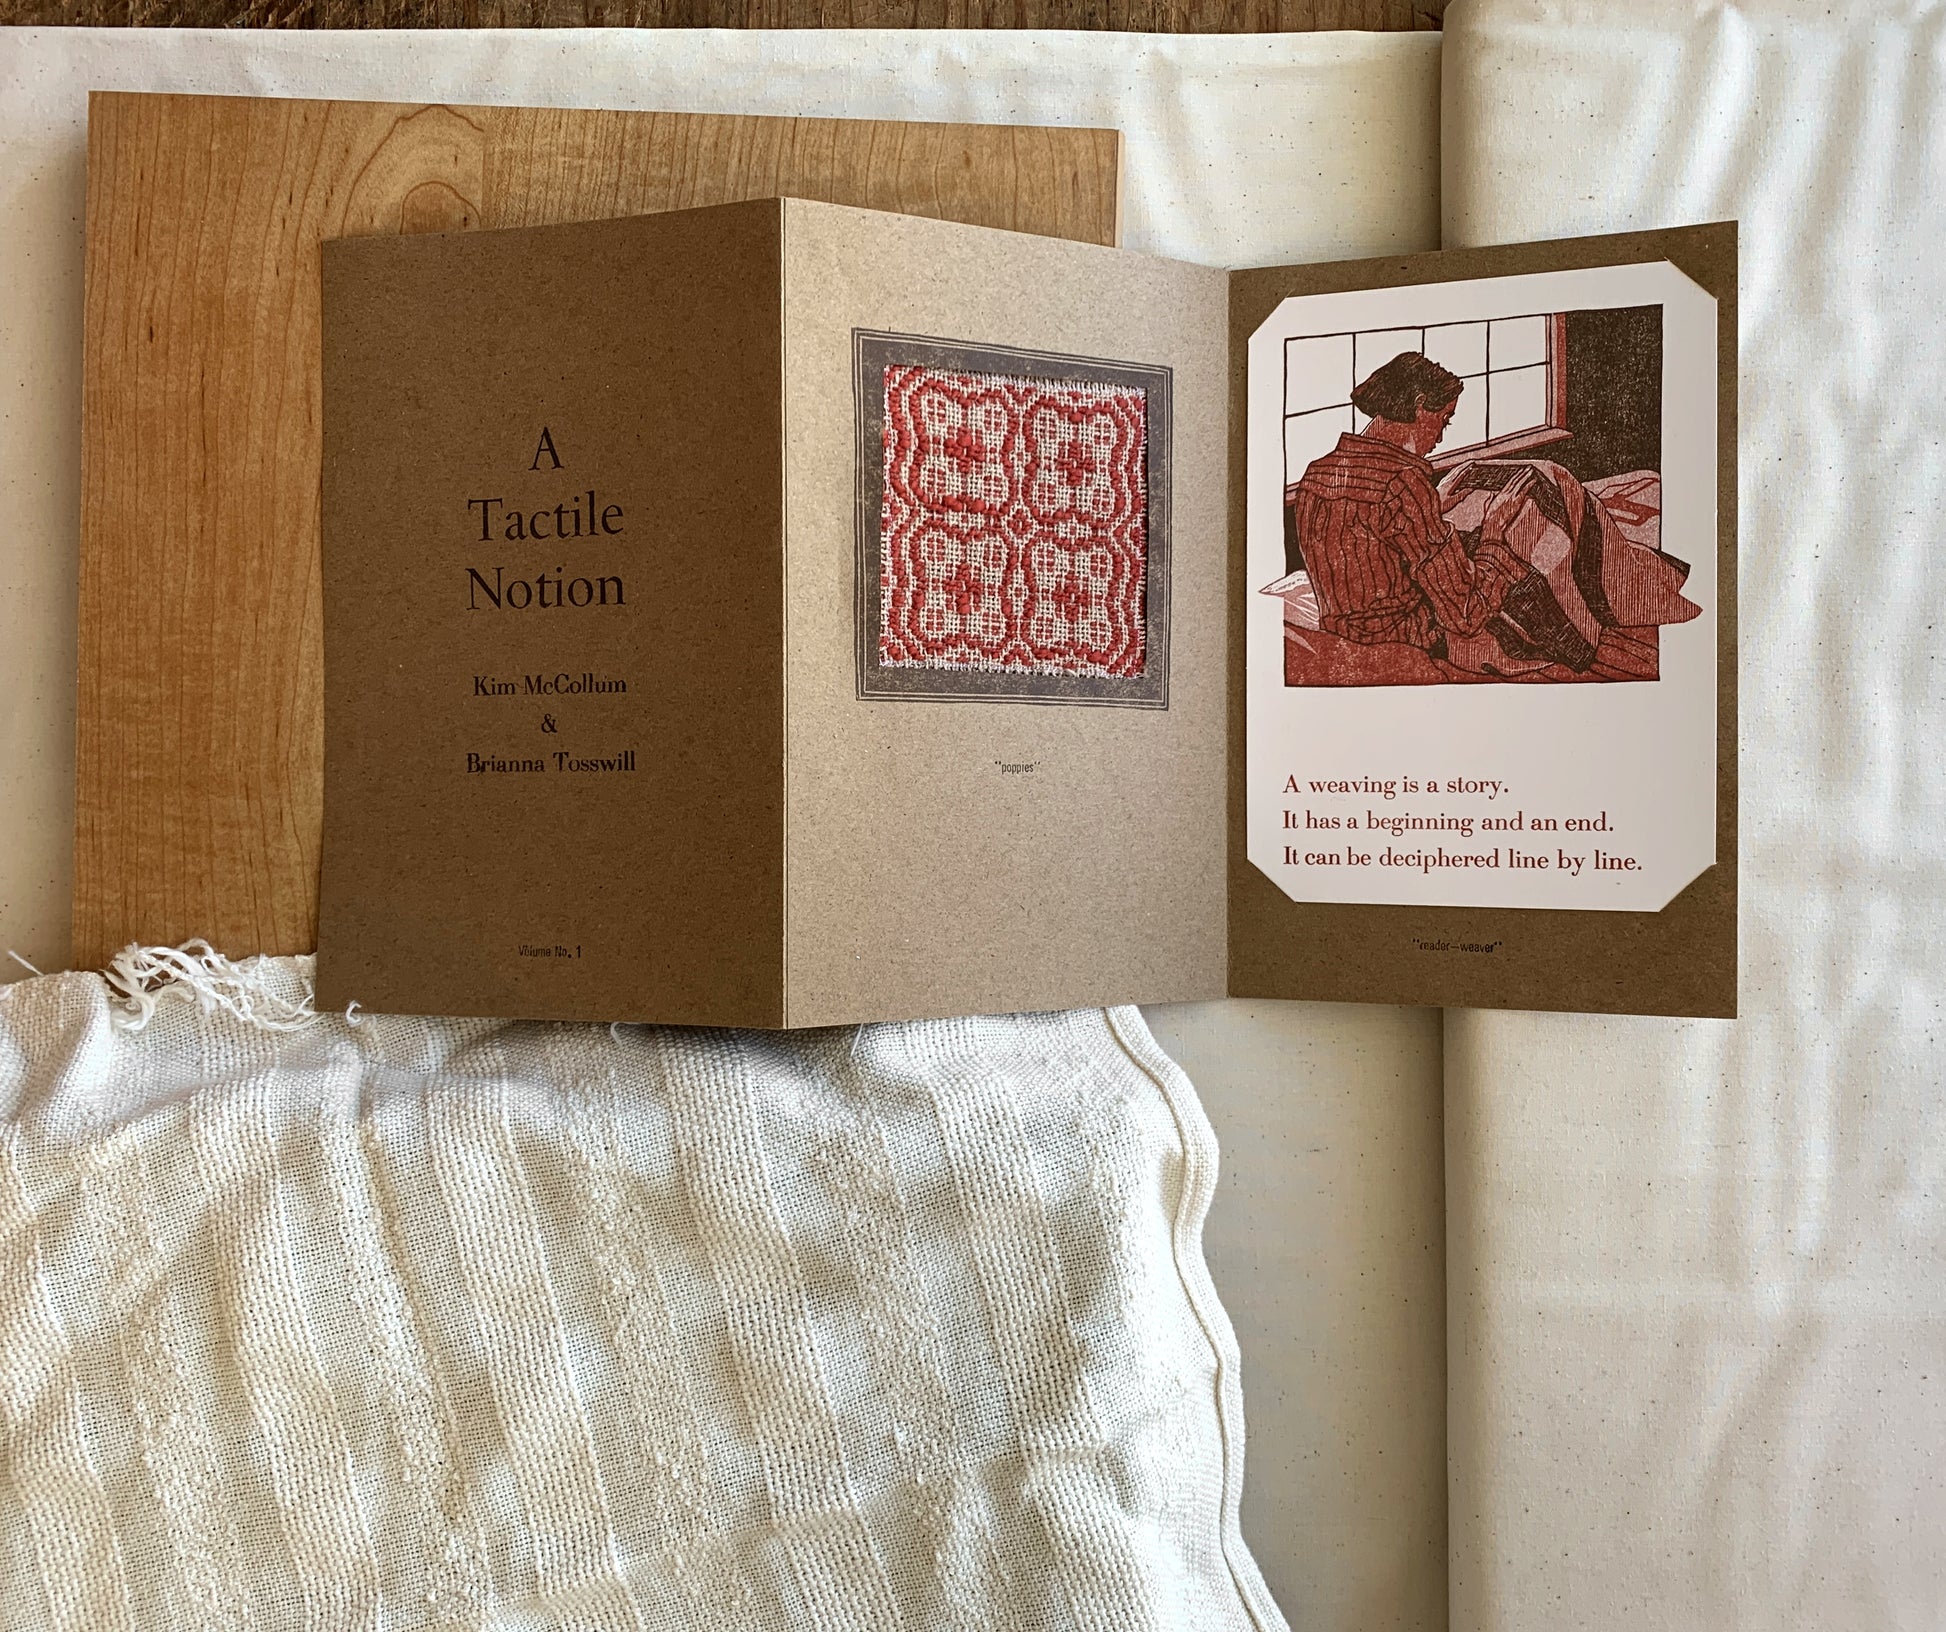 A tri-fold booklet lies on a layered white linen surface. The booklet says "A Tactile Notion / Kim McCollum & Brianna Tosswill / Vol. 1" on the front. The second page has a window with a red and light brown weaving sample which invites touch. The third page has a linocut print of a woman looking intently "reading" the weave of the blaket on her lap. Everything is in tones of brown, pink, red, and beige.